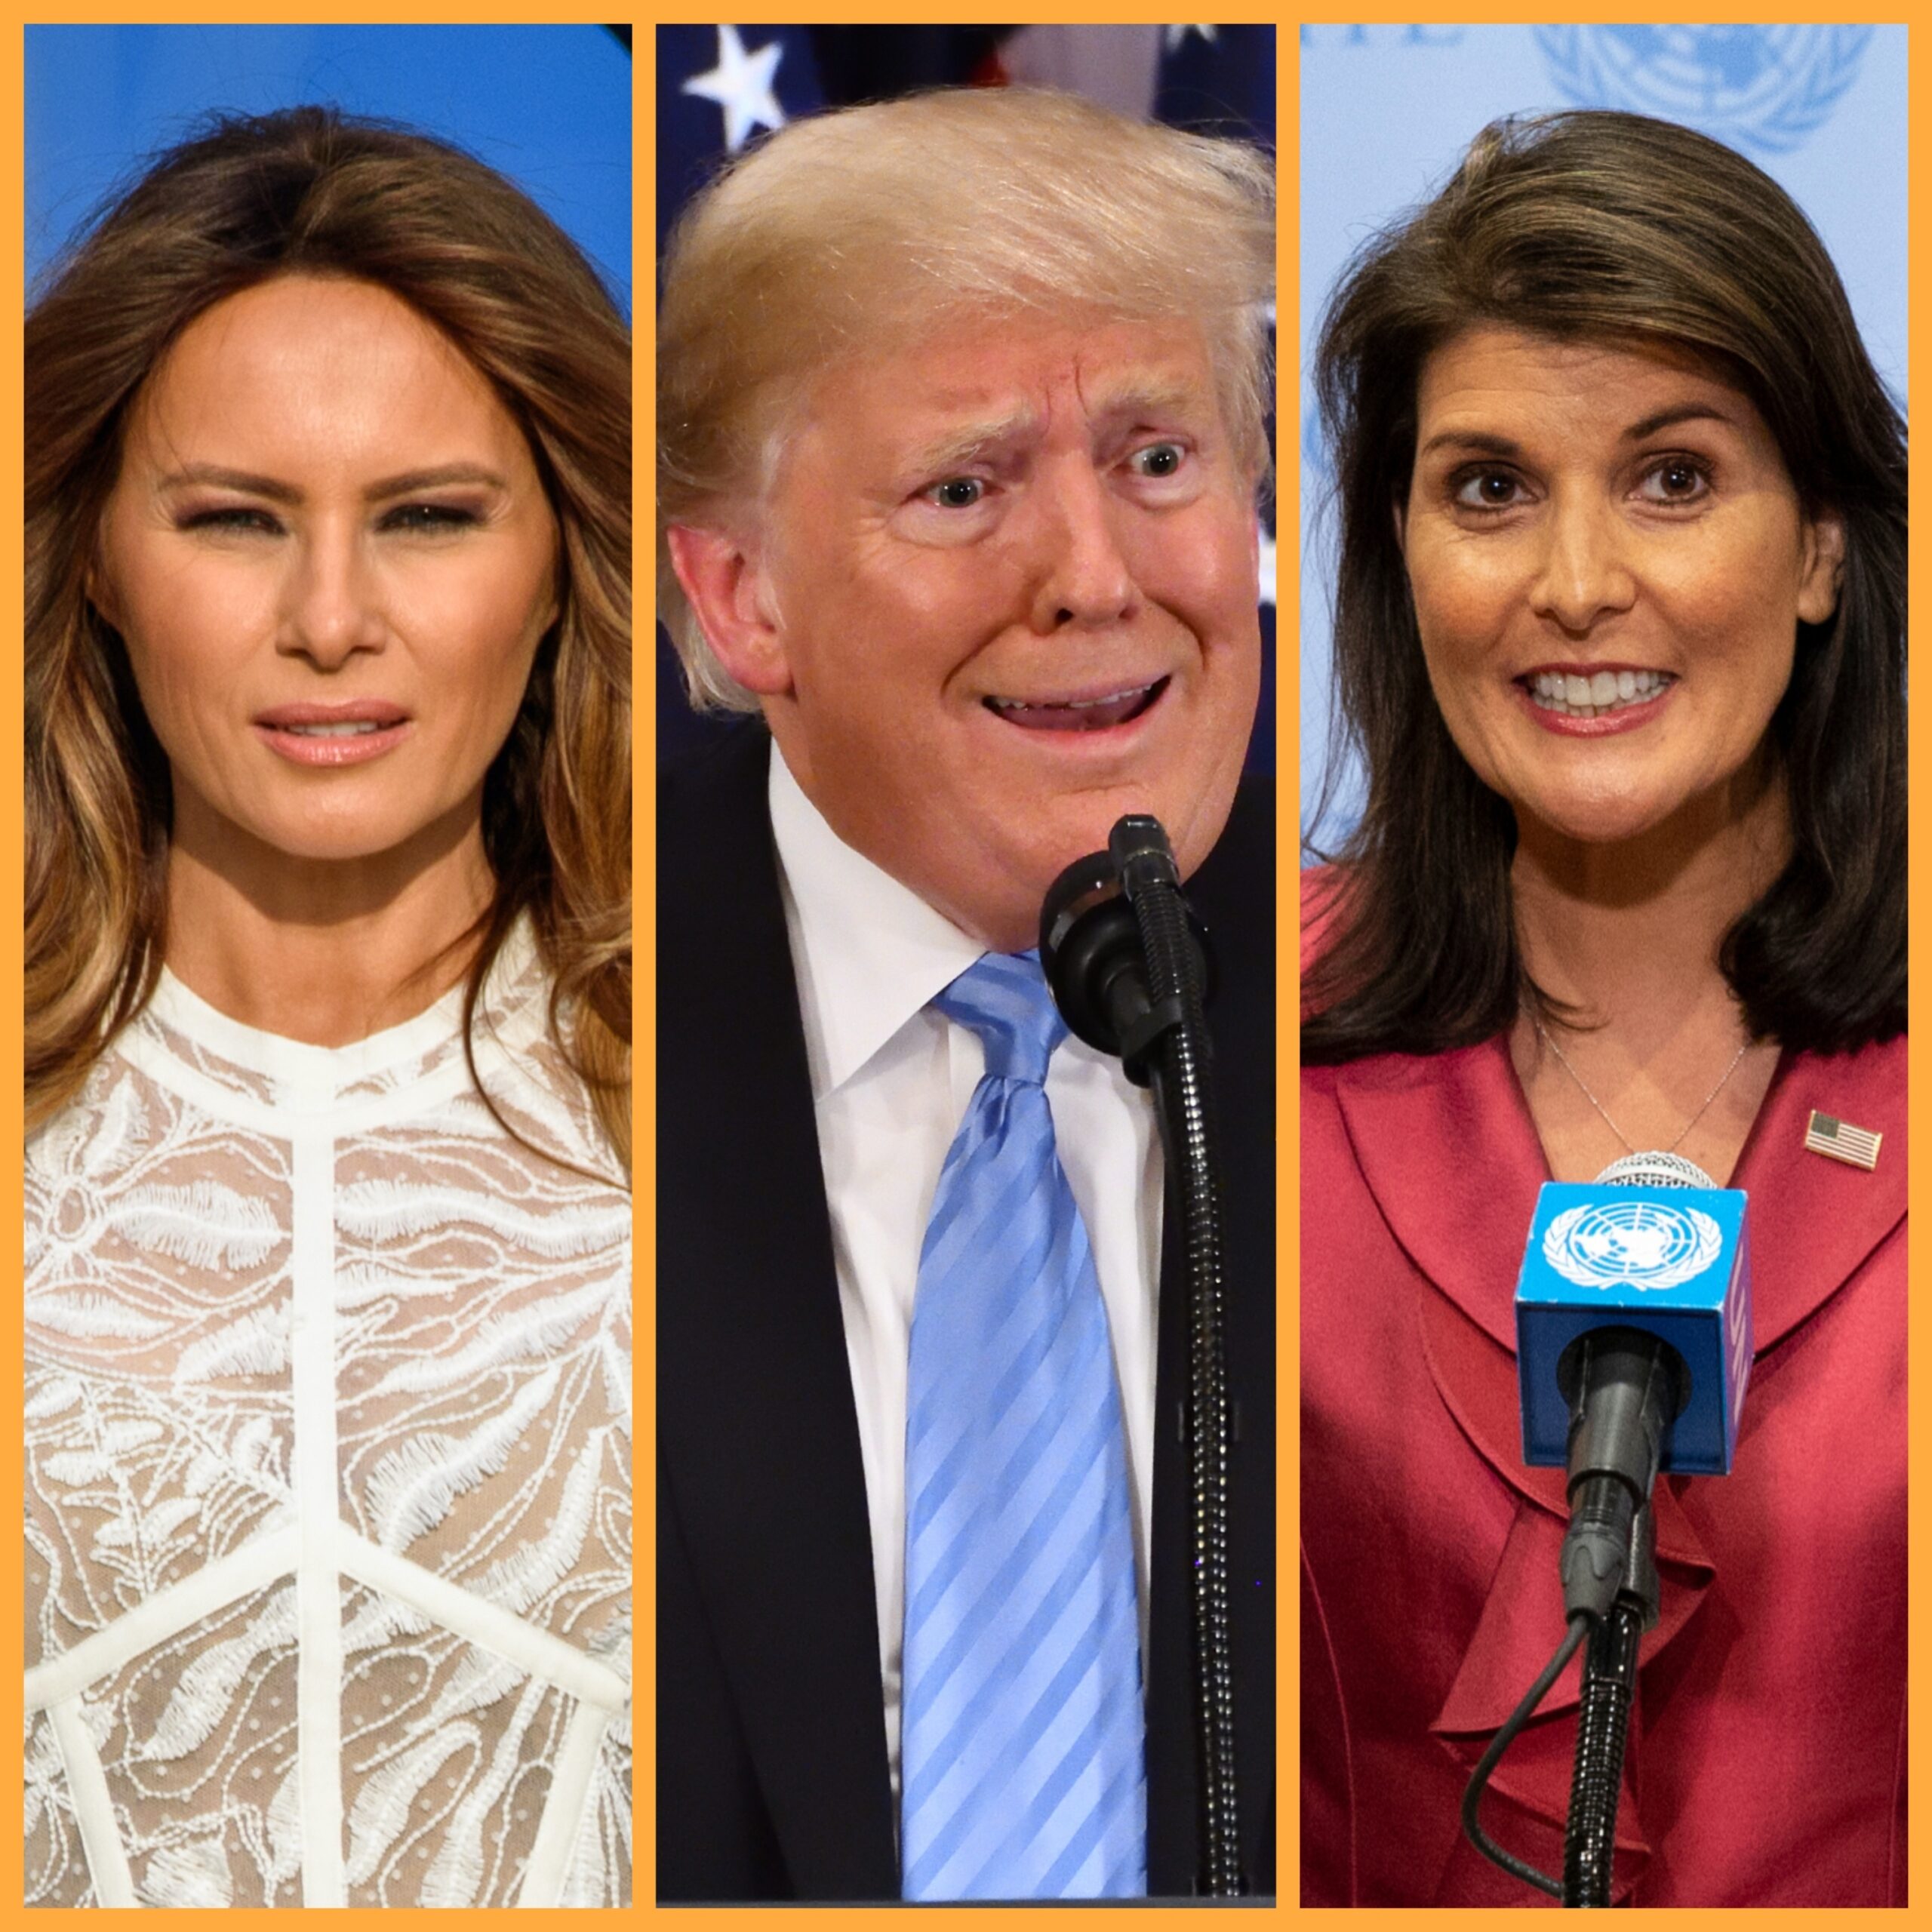 You are currently viewing Melania exposed in new federal filings, Trump begs for cash & Nikki Haley’s humiliation kink